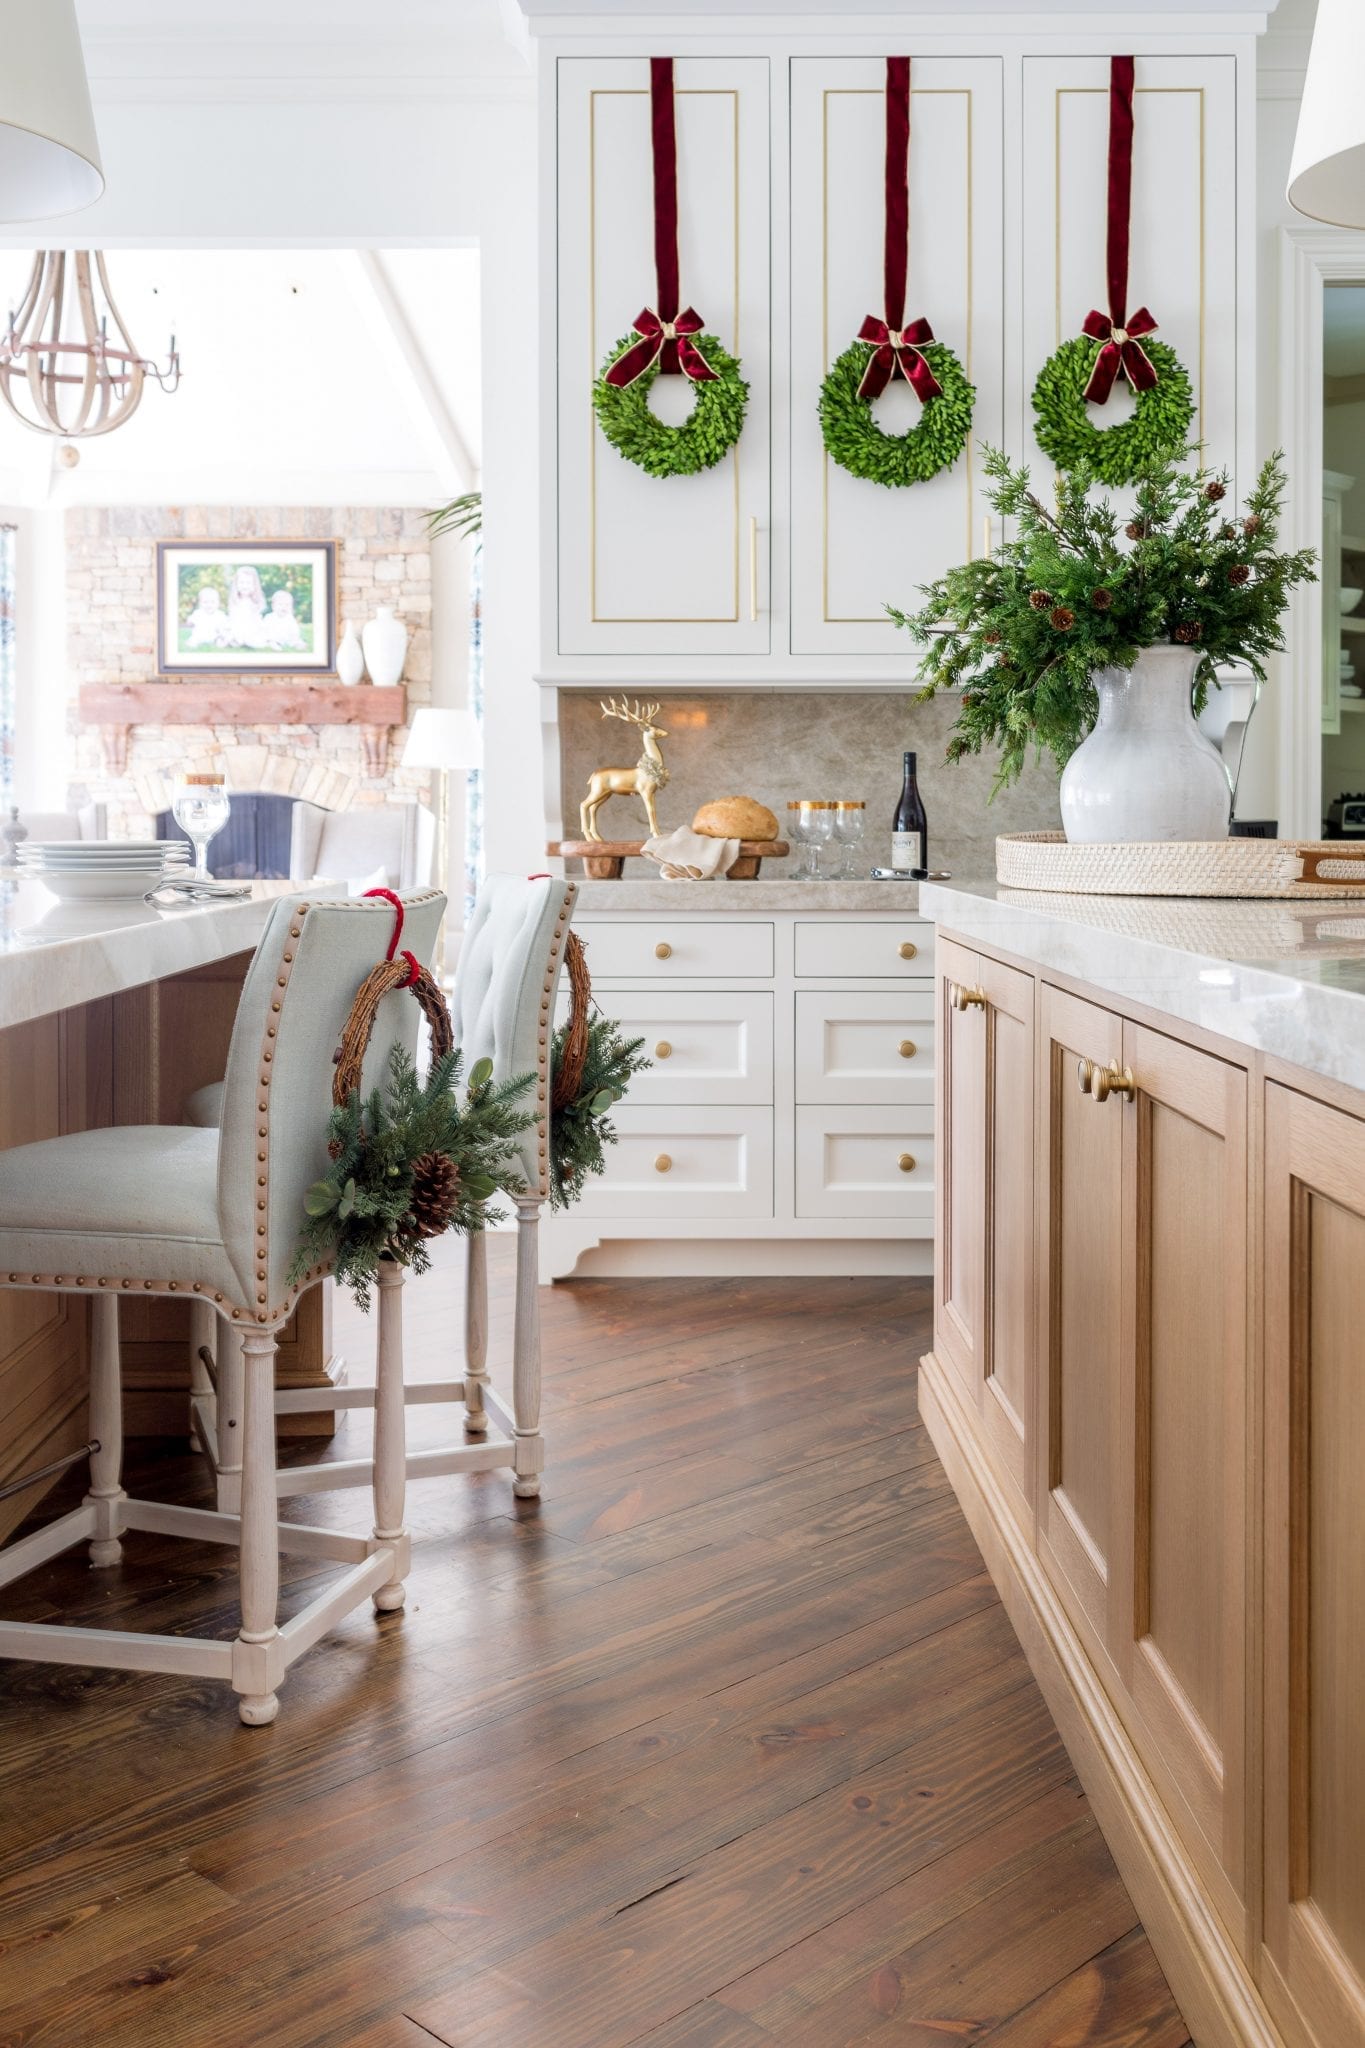 Mini wreaths for cabinets in Christmas themed kitchen. A mini Christmas wreath can add that flare of cheer without overdoing or overwhelming your cabinet space. If a   mini is too tiny, upgrade to a small Christmas wreath. These wreaths are mini boxwood wreath.